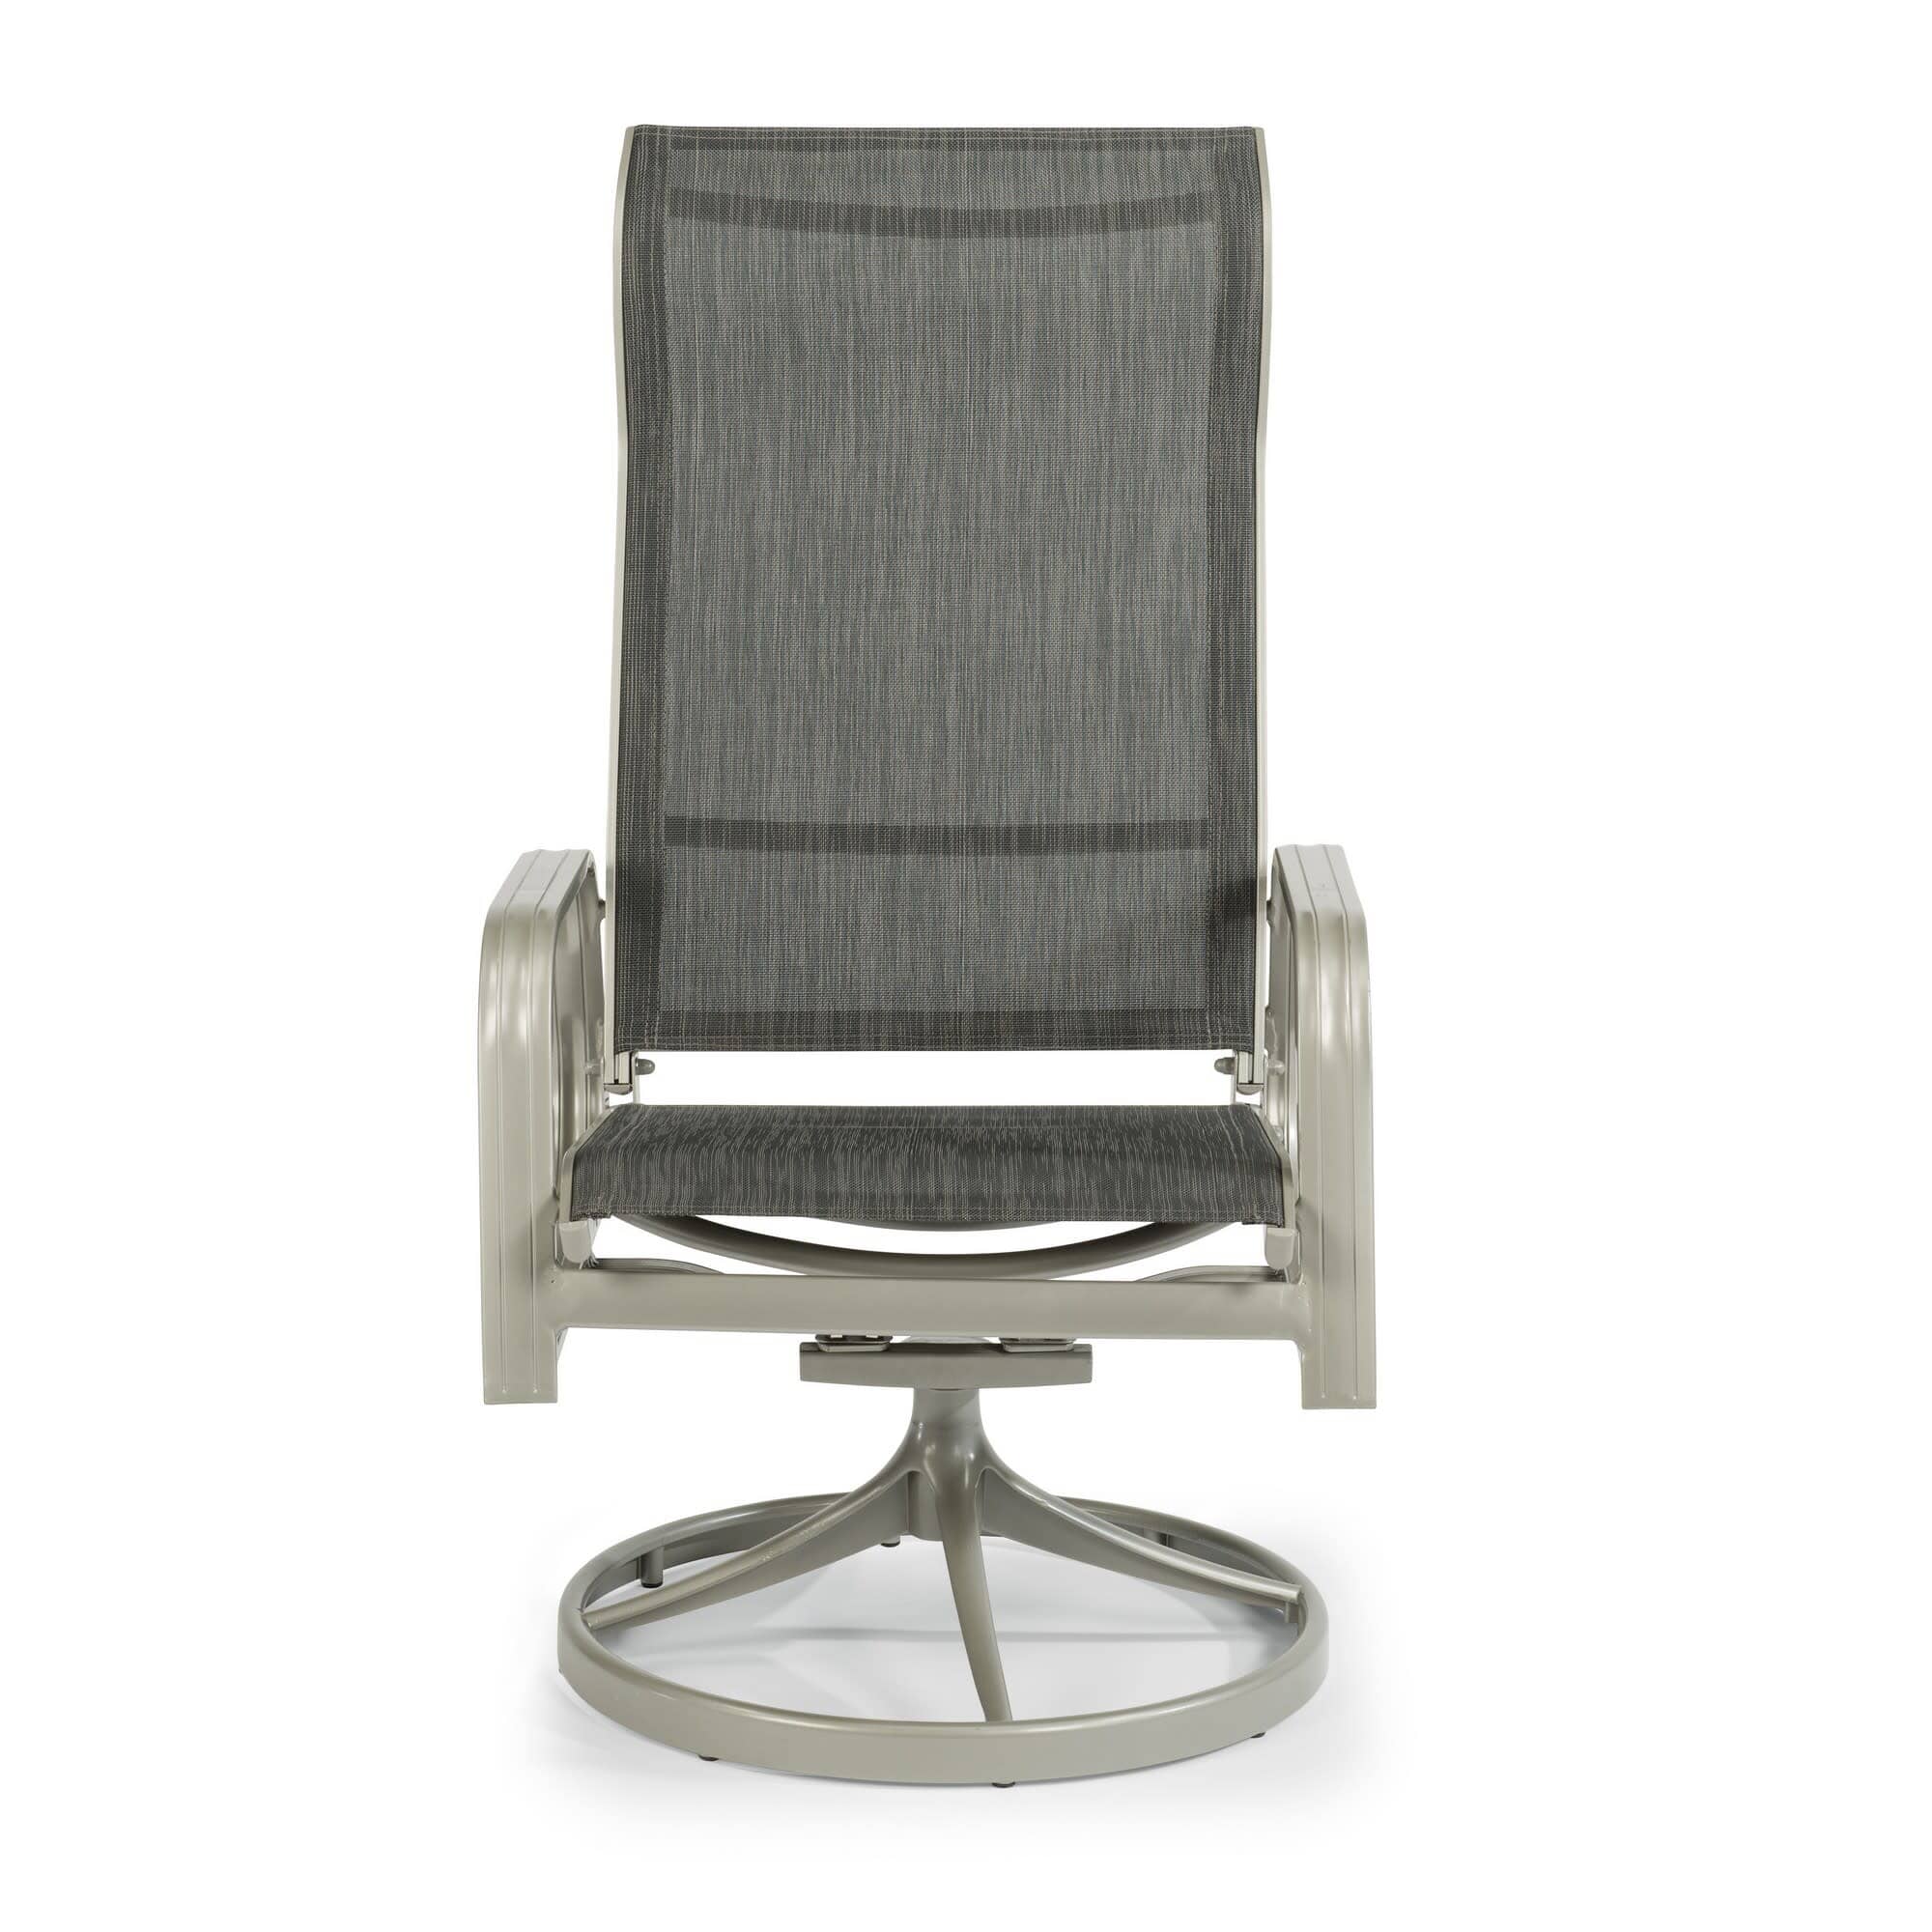 Modern & Contemporary Outdoor Swivel Rocking Chair By Captiva Outdoor Seating Captiva